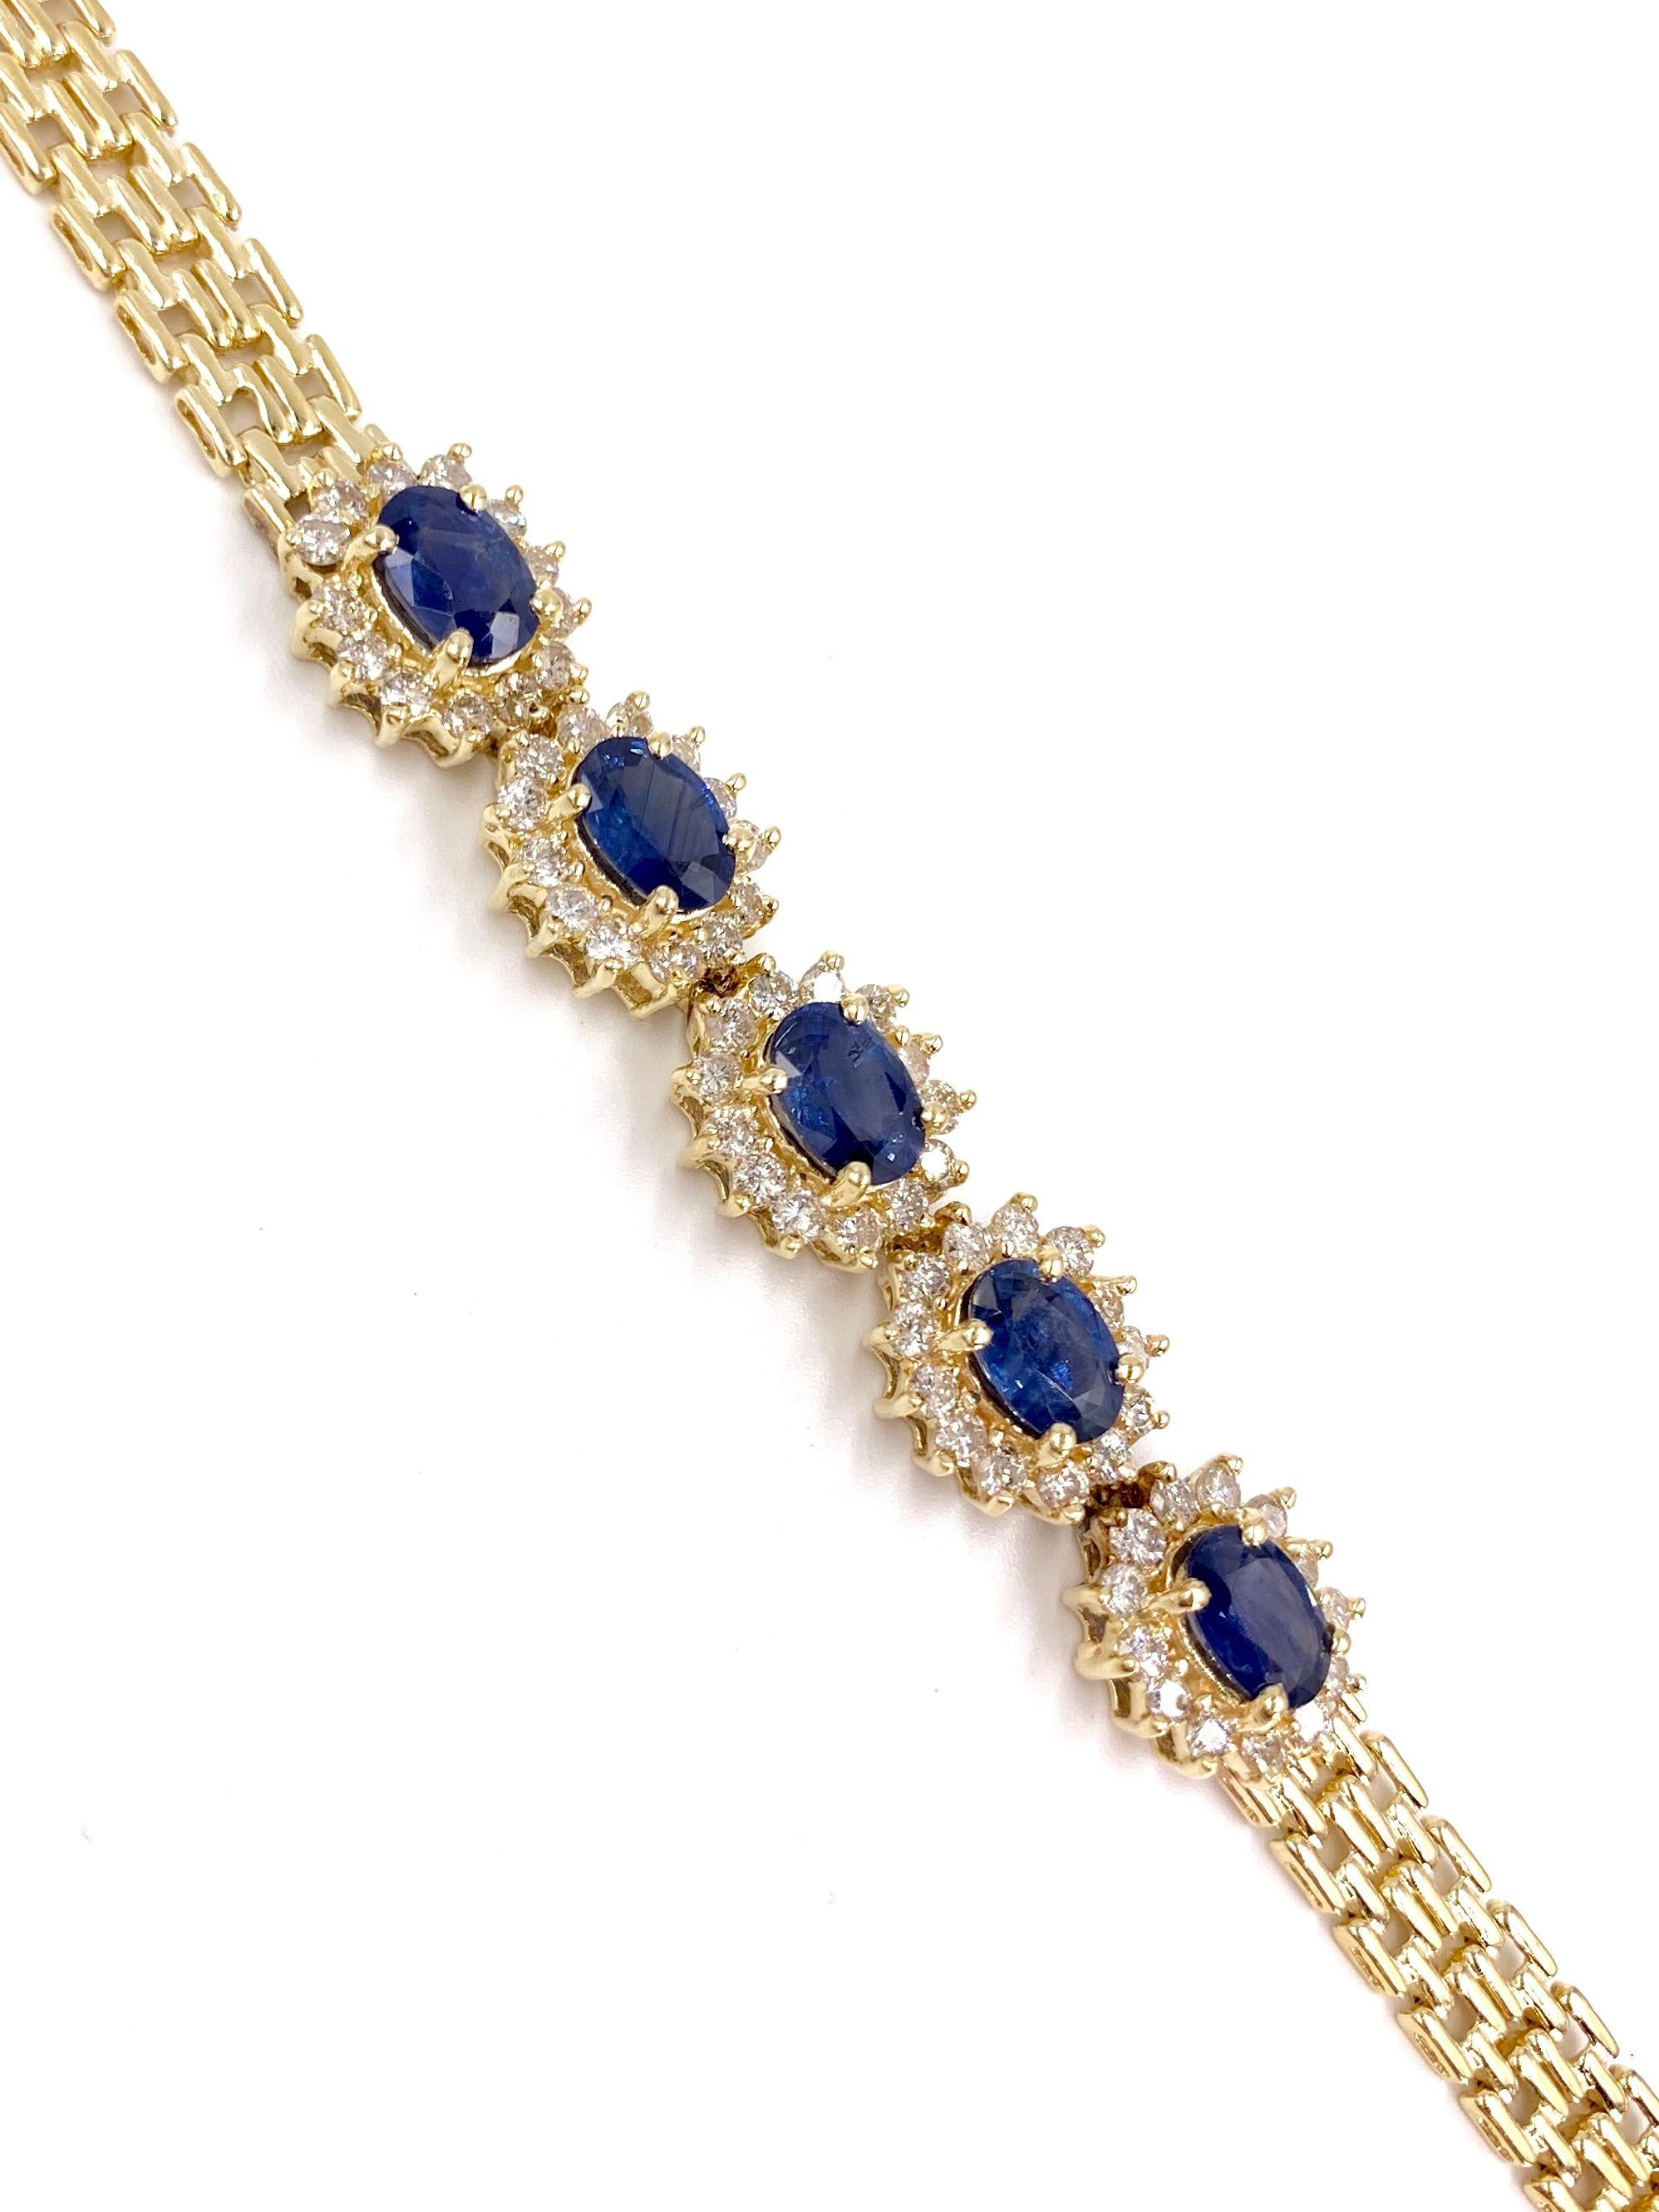 A timeless bracelet adorned with 5 beautiful, well saturated oval blue sapphires each surrounded by a halo of round brilliant diamonds stationed in the center of a 6.25mm 14 karat panthere style linked chain. Oval sapphires have an approximate total